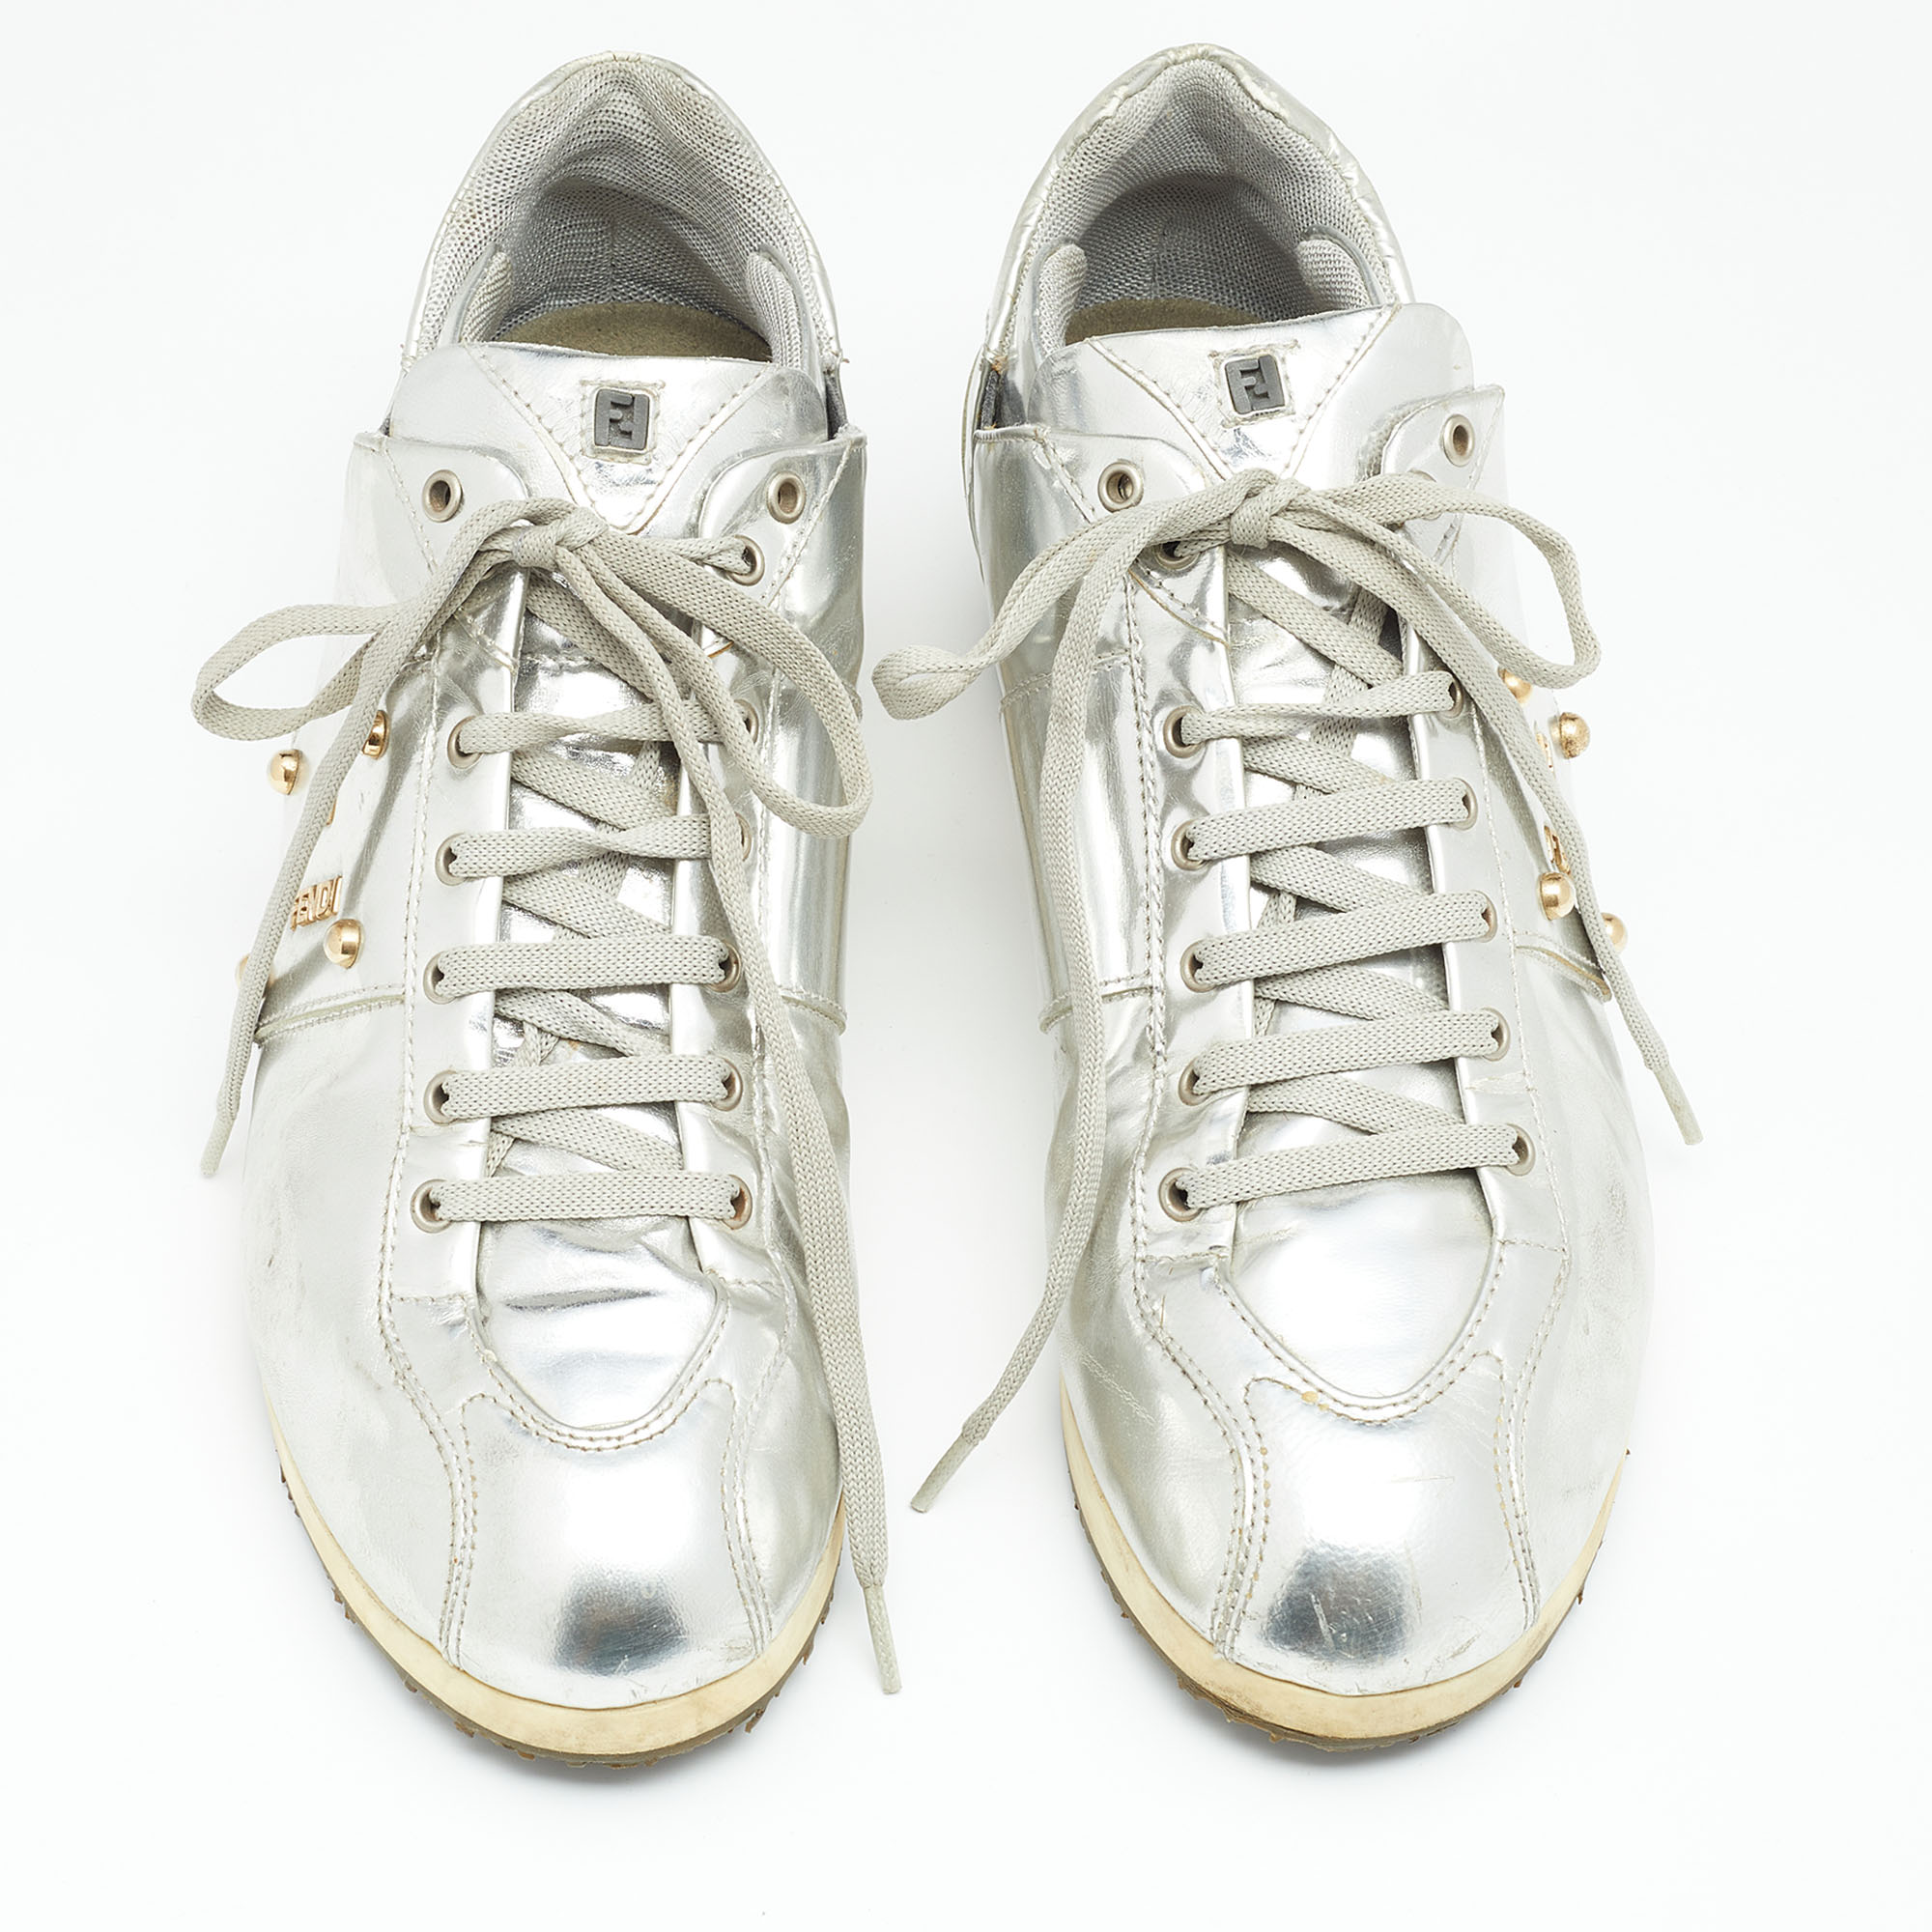 Fendi Metallic Silver Patent Leather Low Top Sneakers Size 38